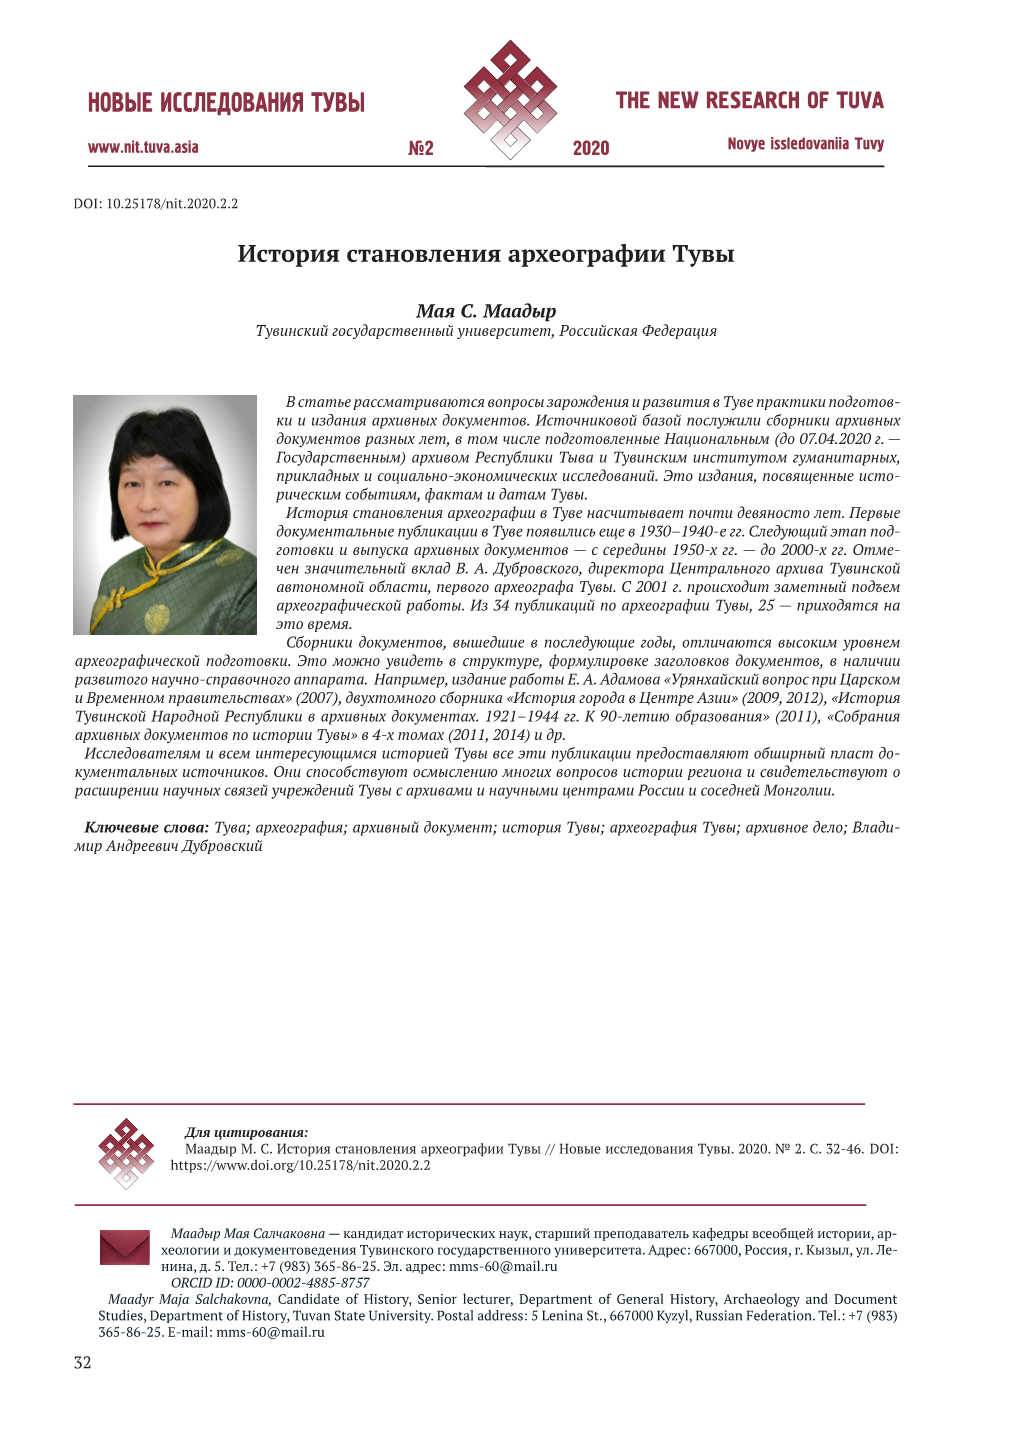 The New Research of Tuva